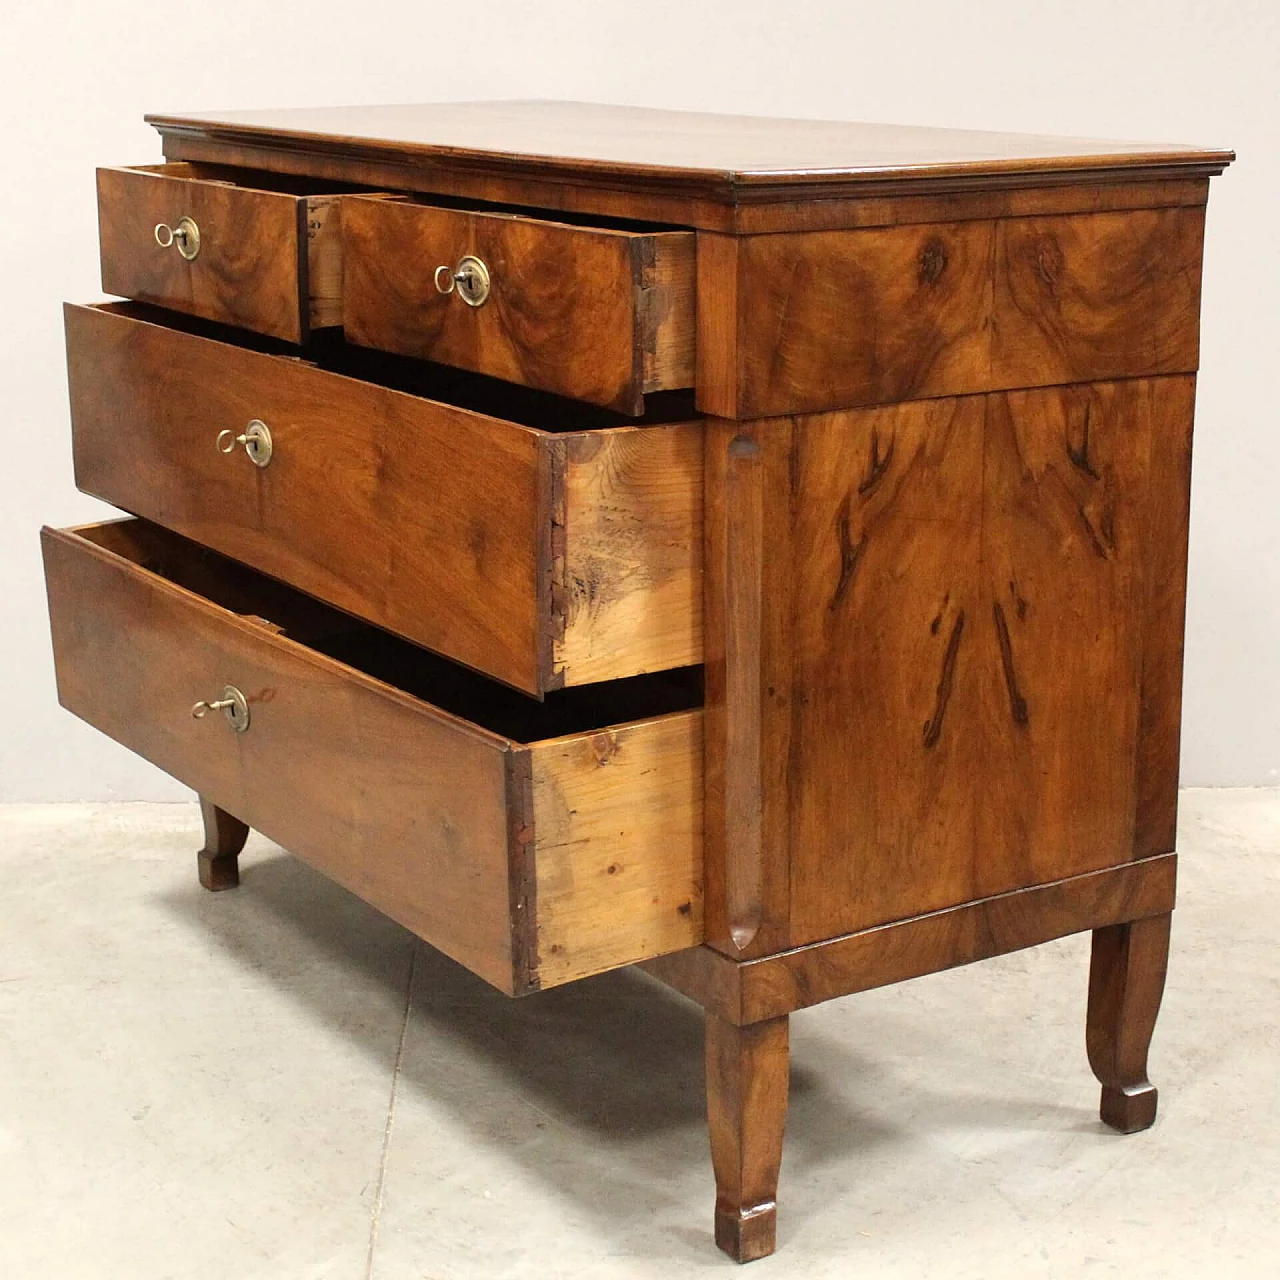 Direttorio chest of drawers in solid walnut and walnut panelling, second half of the 18th century 2